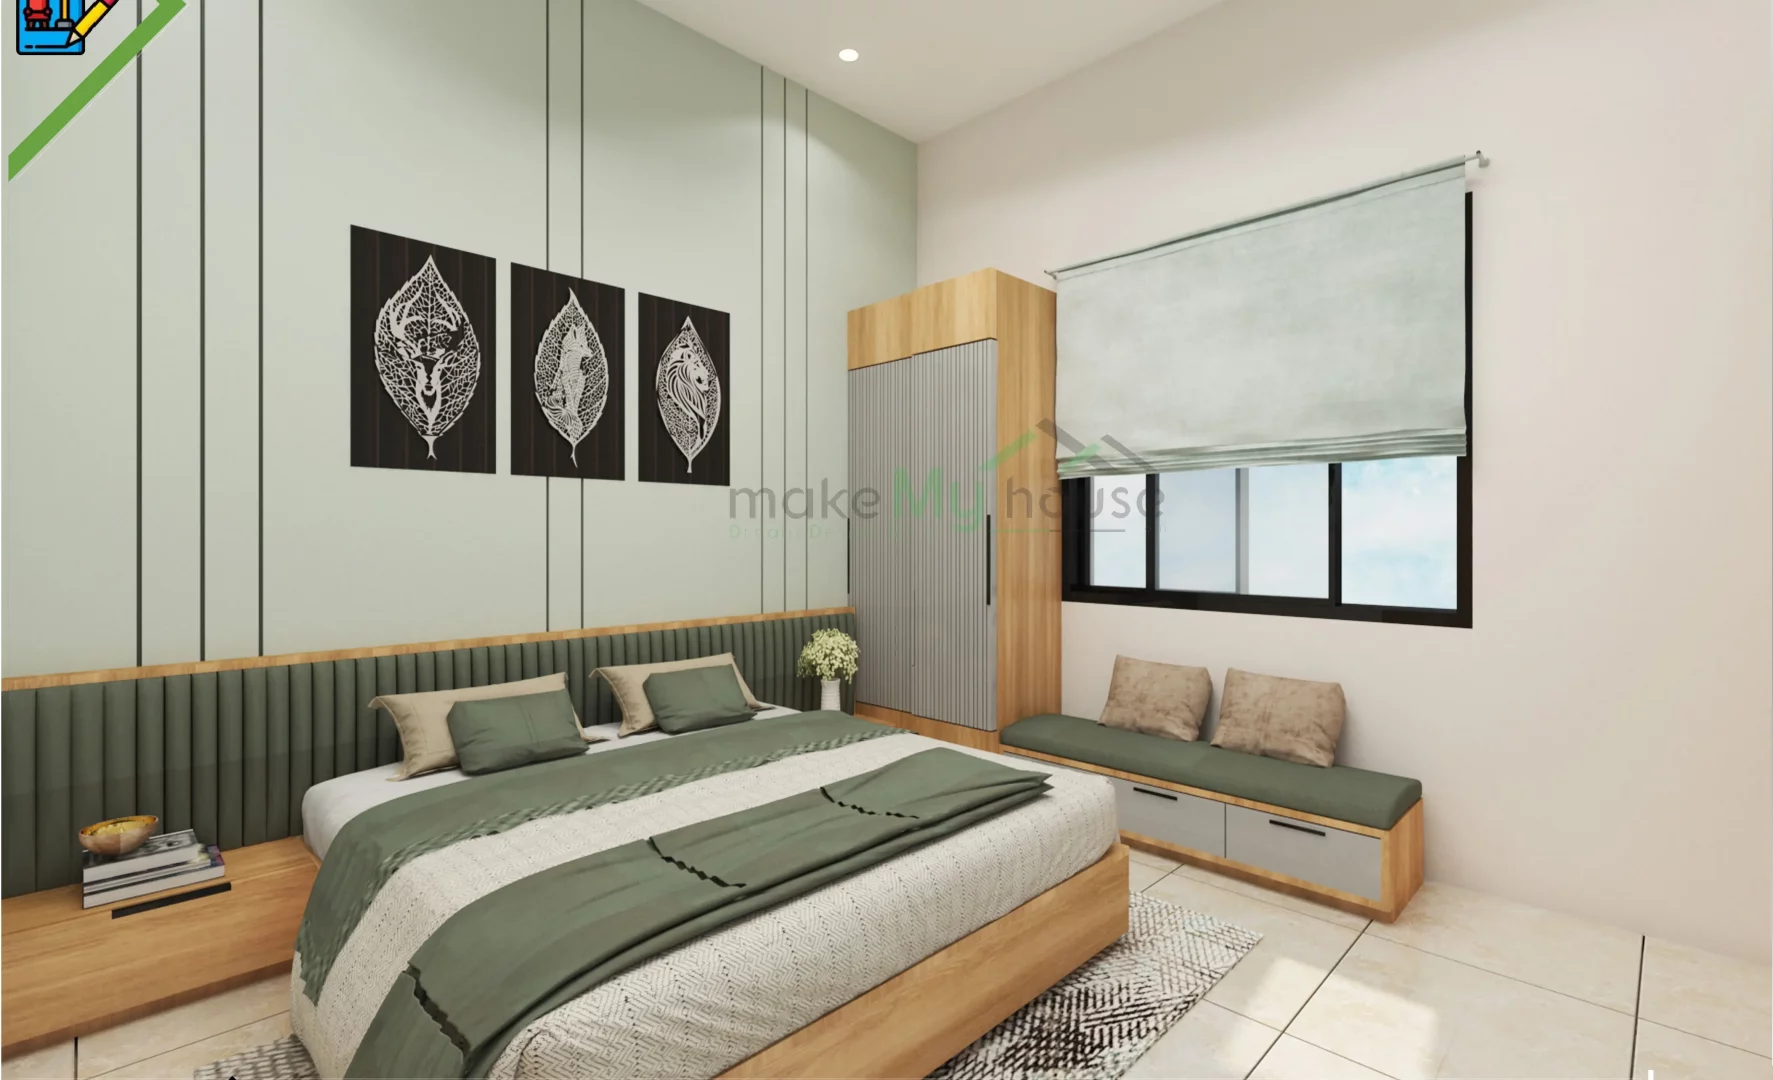 Pastel green is a light and delicate shade of green that has a calming and soothing effect on the eyes. It is often associated with nature, growth, and renewal, making it an ideal choice for creating a serene and harmonious environment in interior design.